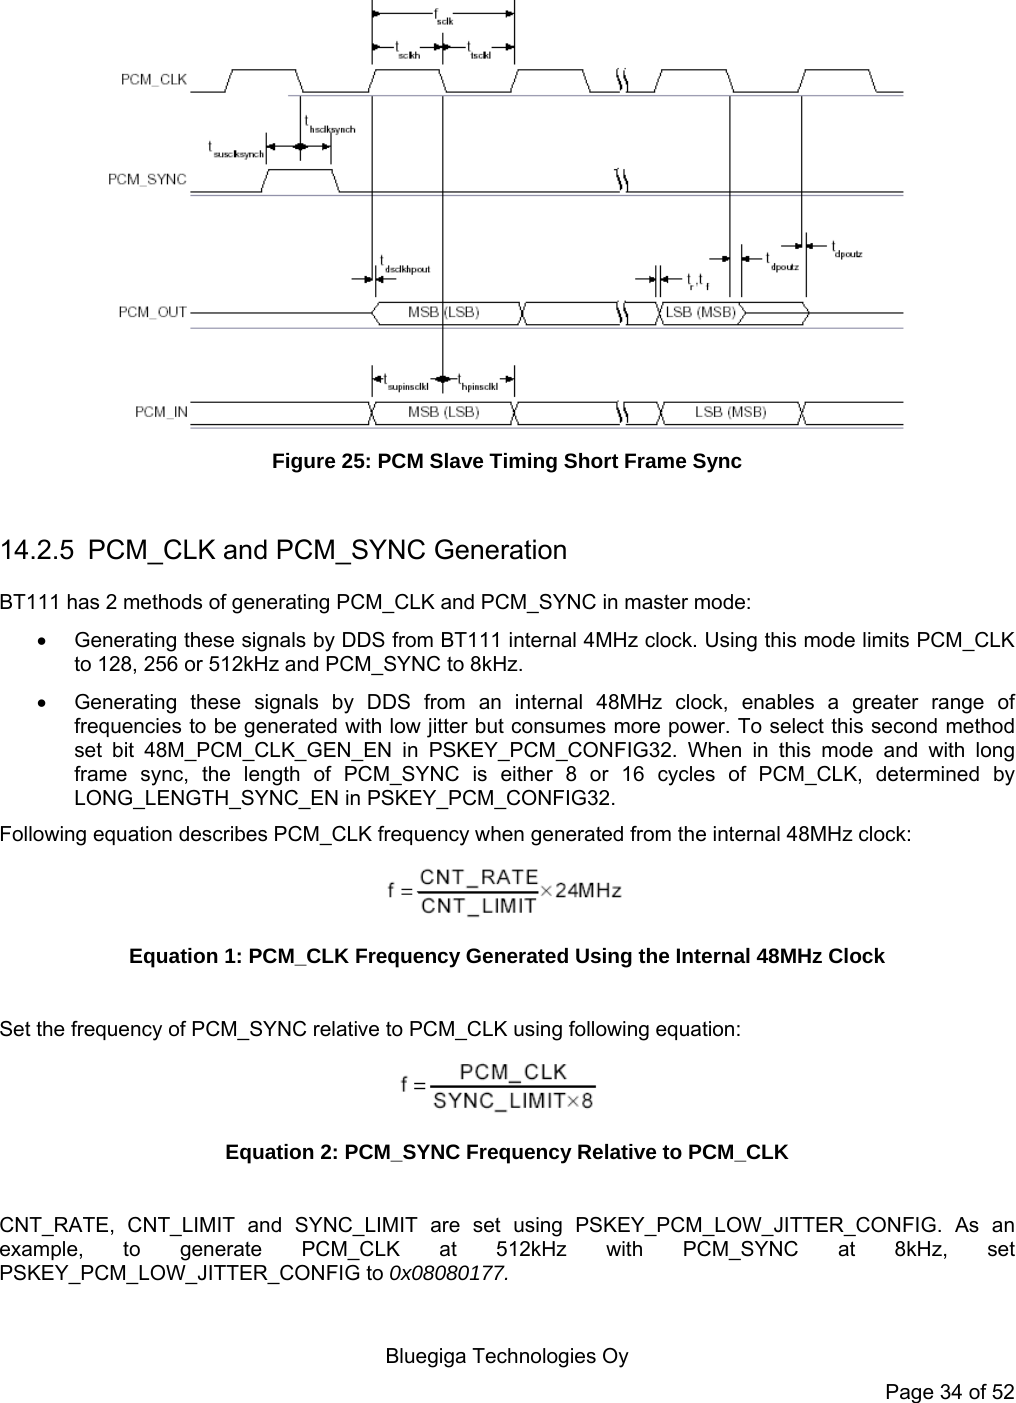    Bluegiga Technologies Oy Page 34 of 52   Figure 25: PCM Slave Timing Short Frame Sync  14.2.5  PCM_CLK and PCM_SYNC Generation BT111 has 2 methods of generating PCM_CLK and PCM_SYNC in master mode:   Generating these signals by DDS from BT111 internal 4MHz clock. Using this mode limits PCM_CLK to 128, 256 or 512kHz and PCM_SYNC to 8kHz.   Generating these signals by DDS from an internal 48MHz clock, enables a greater range of frequencies to be generated with low jitter but consumes more power. To select this second method set bit 48M_PCM_CLK_GEN_EN in PSKEY_PCM_CONFIG32. When in this mode and with long frame sync, the length of PCM_SYNC is either 8 or 16 cycles of PCM_CLK, determined by LONG_LENGTH_SYNC_EN in PSKEY_PCM_CONFIG32. Following equation describes PCM_CLK frequency when generated from the internal 48MHz clock:  Equation 1: PCM_CLK Frequency Generated Using the Internal 48MHz Clock  Set the frequency of PCM_SYNC relative to PCM_CLK using following equation:  Equation 2: PCM_SYNC Frequency Relative to PCM_CLK  CNT_RATE, CNT_LIMIT and SYNC_LIMIT are set using PSKEY_PCM_LOW_JITTER_CONFIG. As an example, to generate PCM_CLK at 512kHz with PCM_SYNC at 8kHz, set PSKEY_PCM_LOW_JITTER_CONFIG to 0x08080177. 